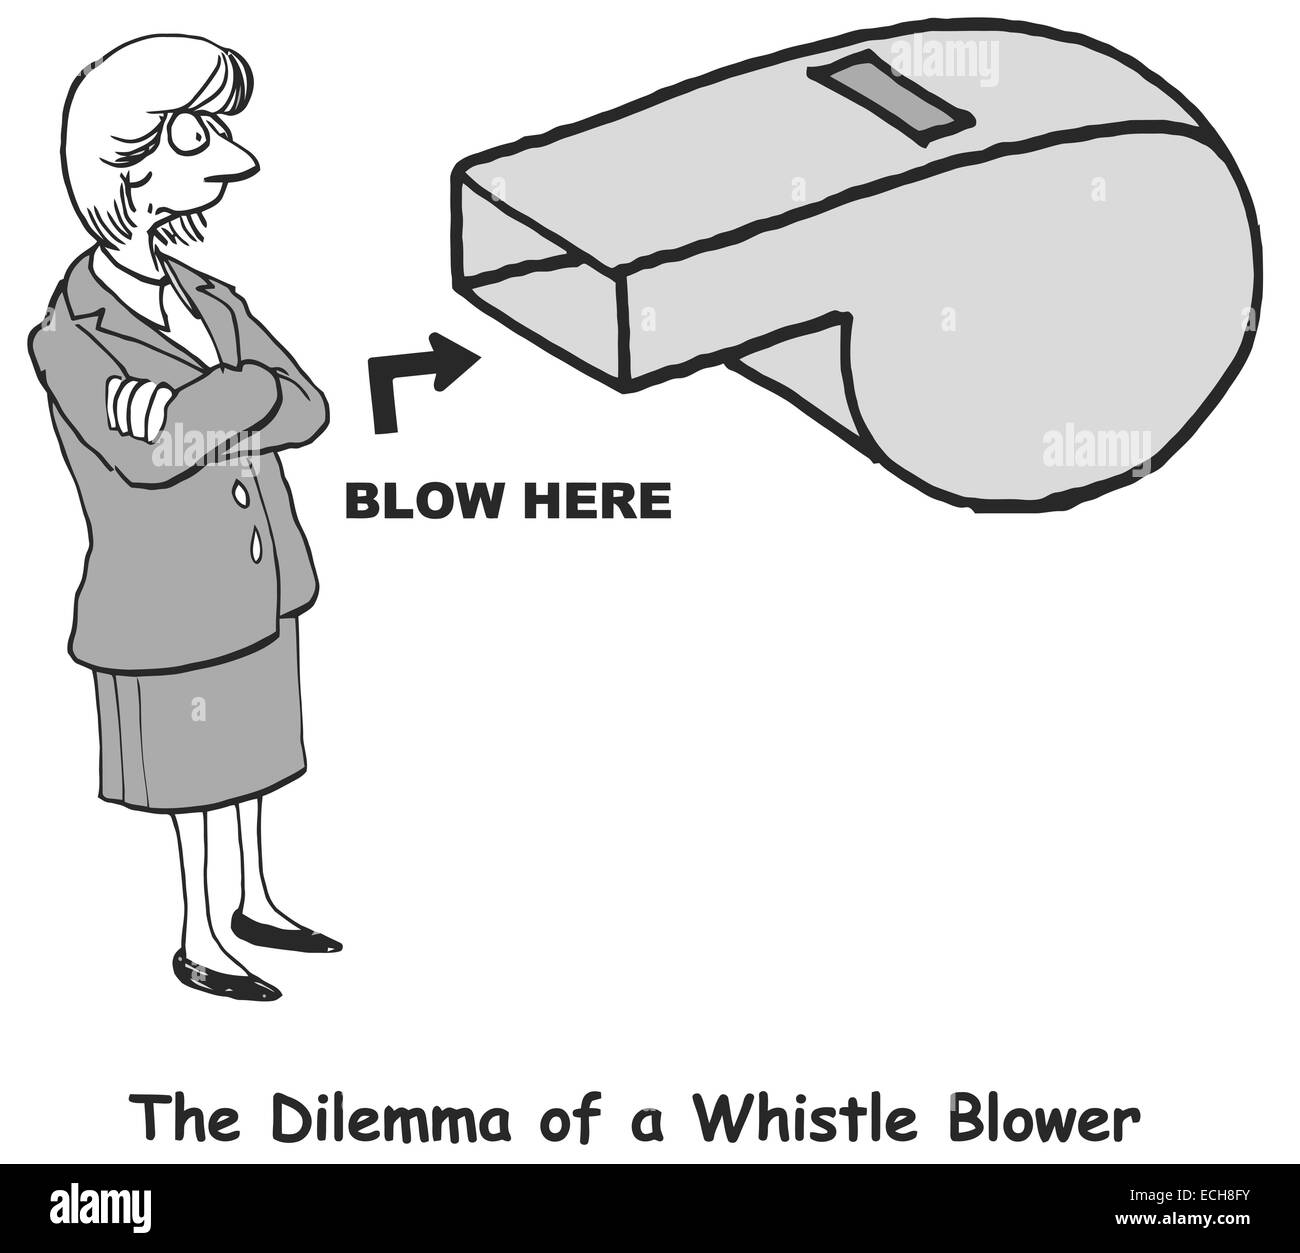 The Dilemma of a Whistle Blower Stock Vector